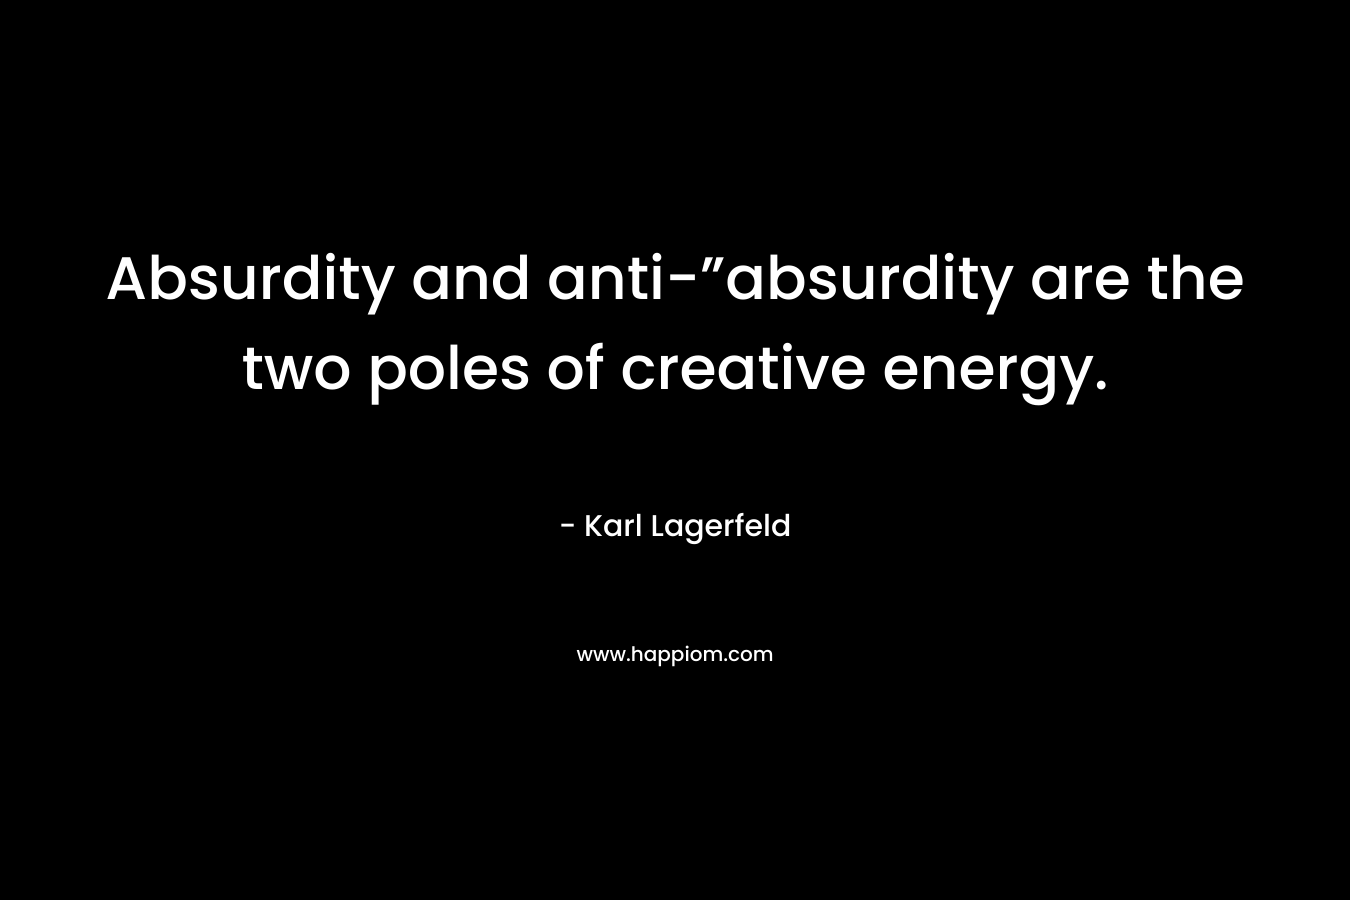 Absurdity and anti-”absurdity are the two poles of creative energy.